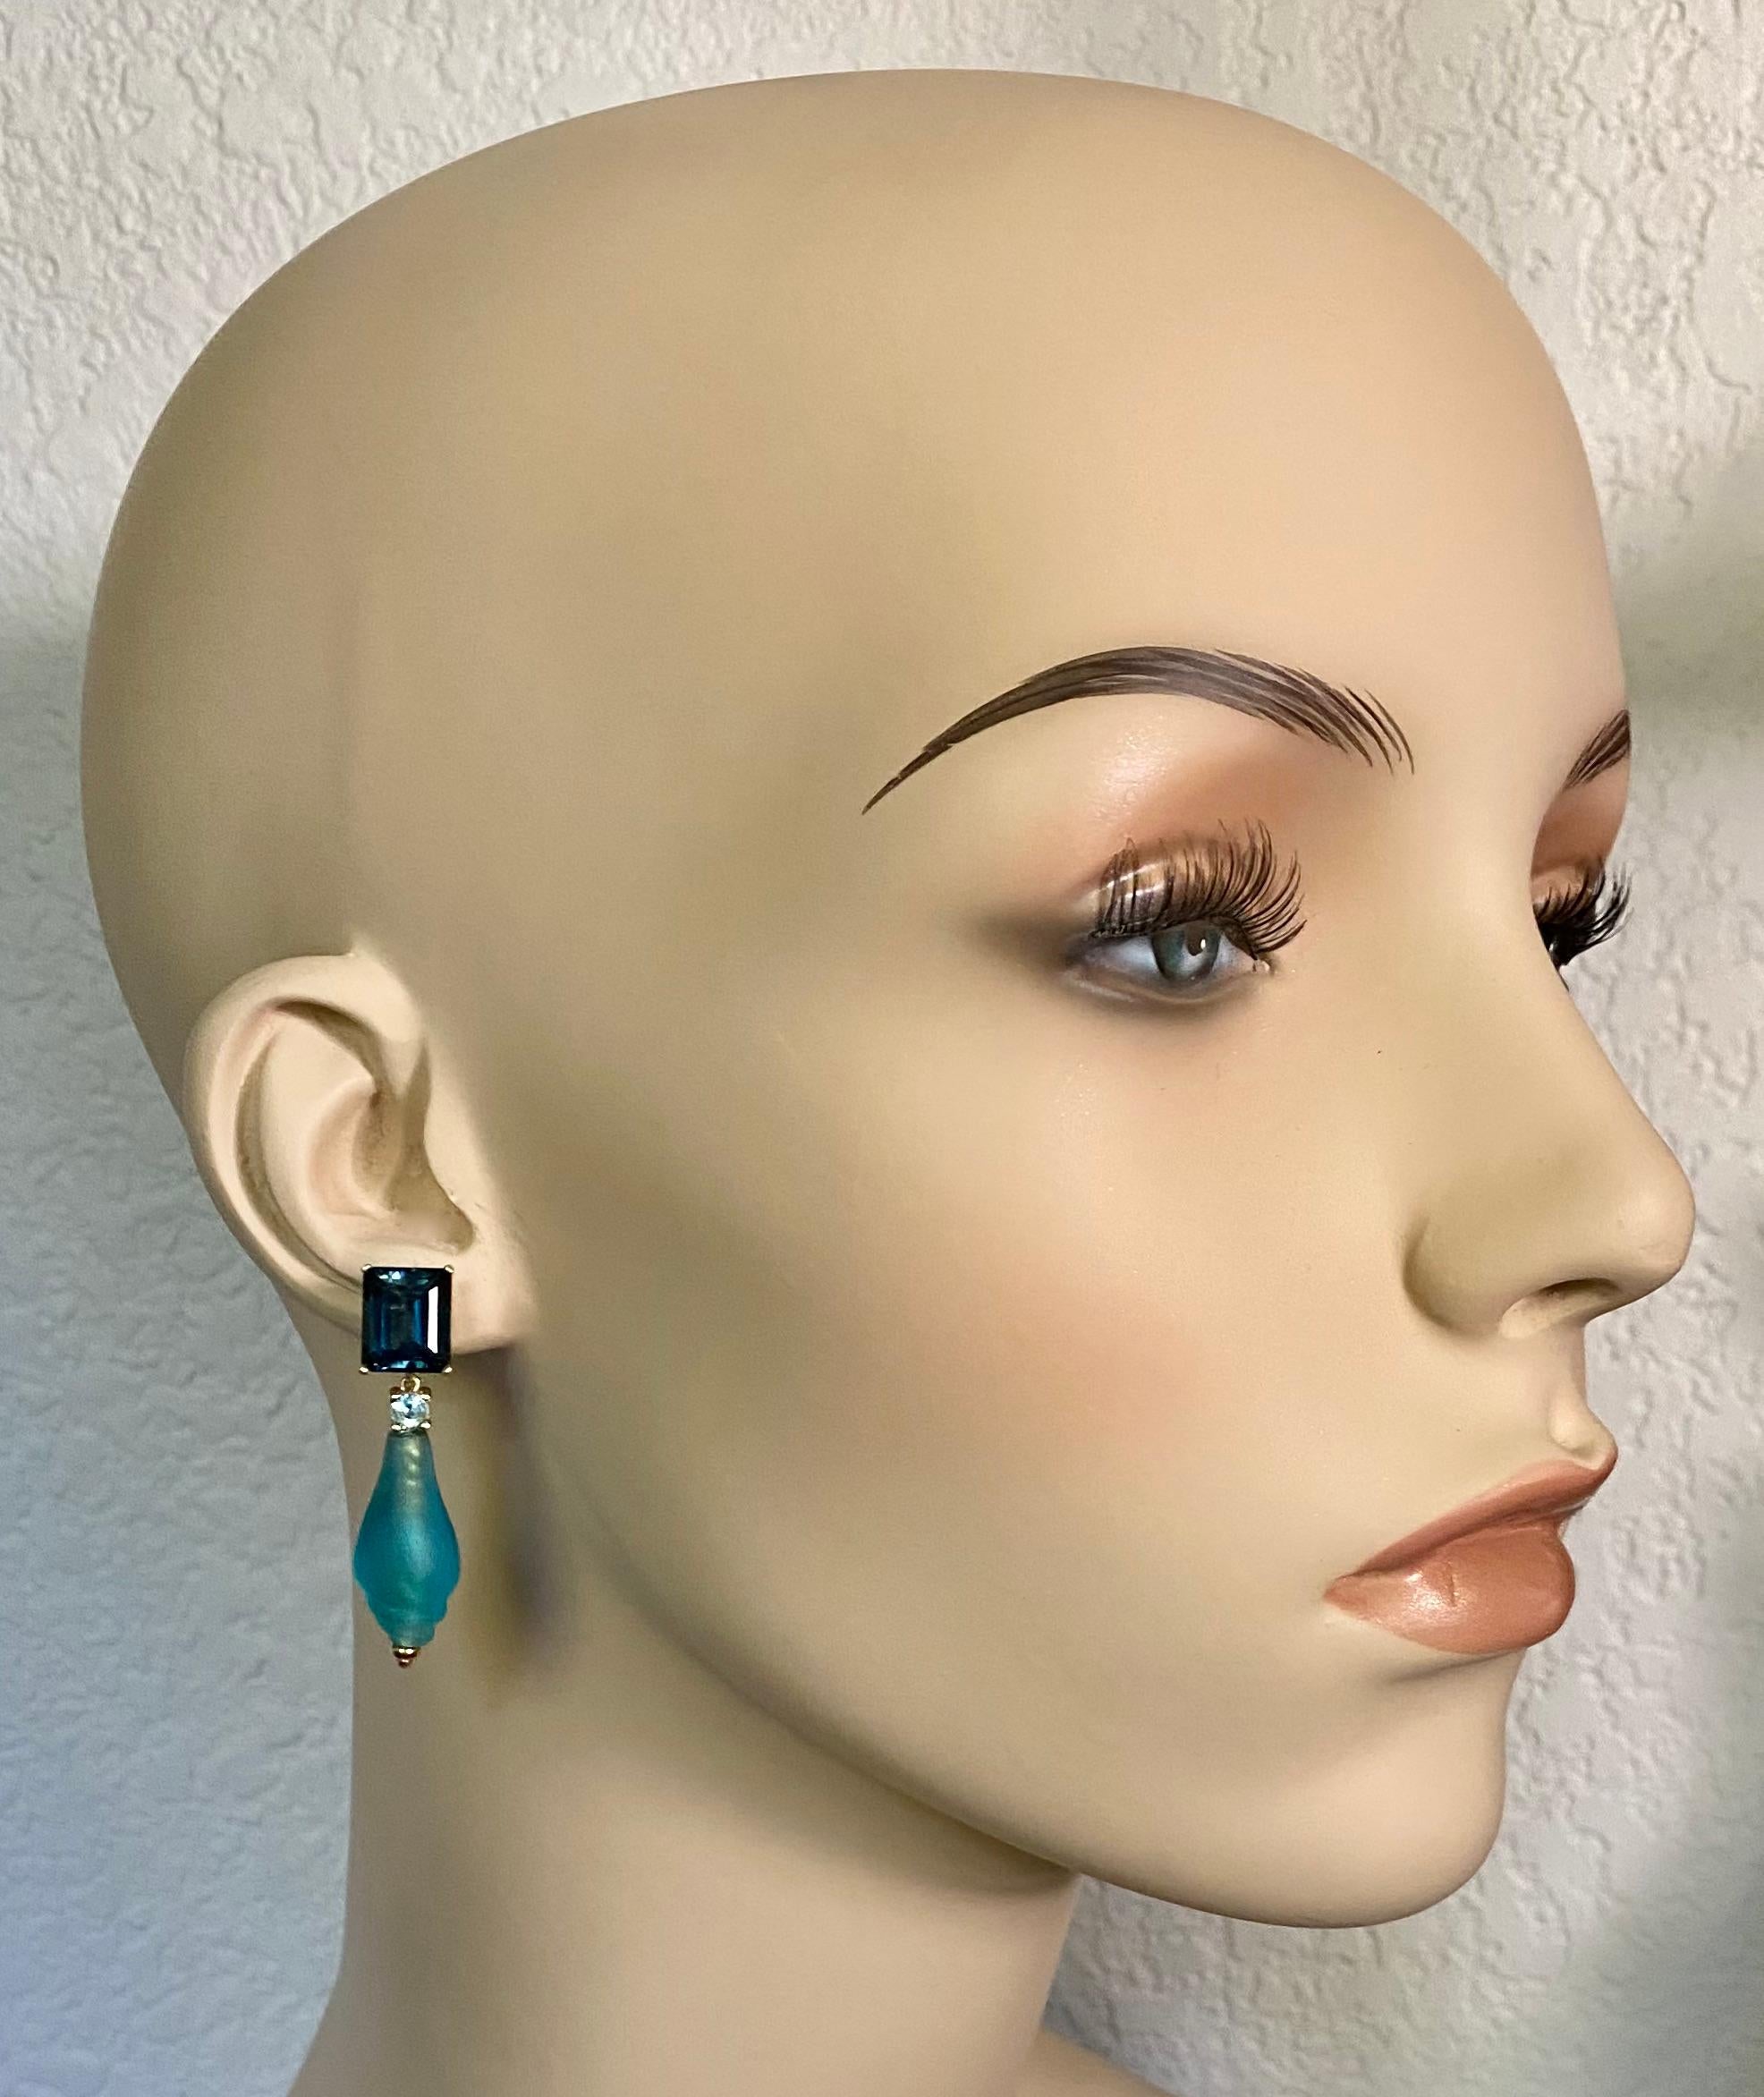 Ancient glass beads are complimented with blue topaz in these dangle earrings.  The beads, dating to the 11th century, were created by the Pyu people of northern Burma, now Myanmar.  The turquoise colored beads are shell shaped. Over centuries in